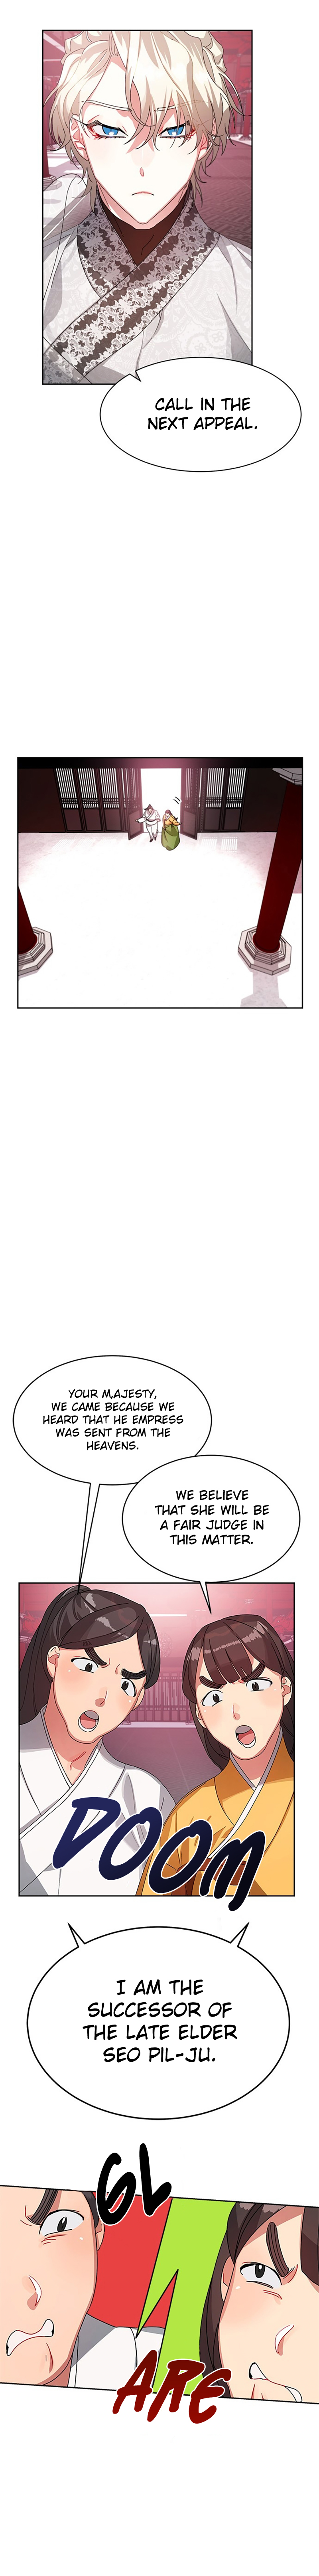 What Kind of Empress Is This? Ch. 12